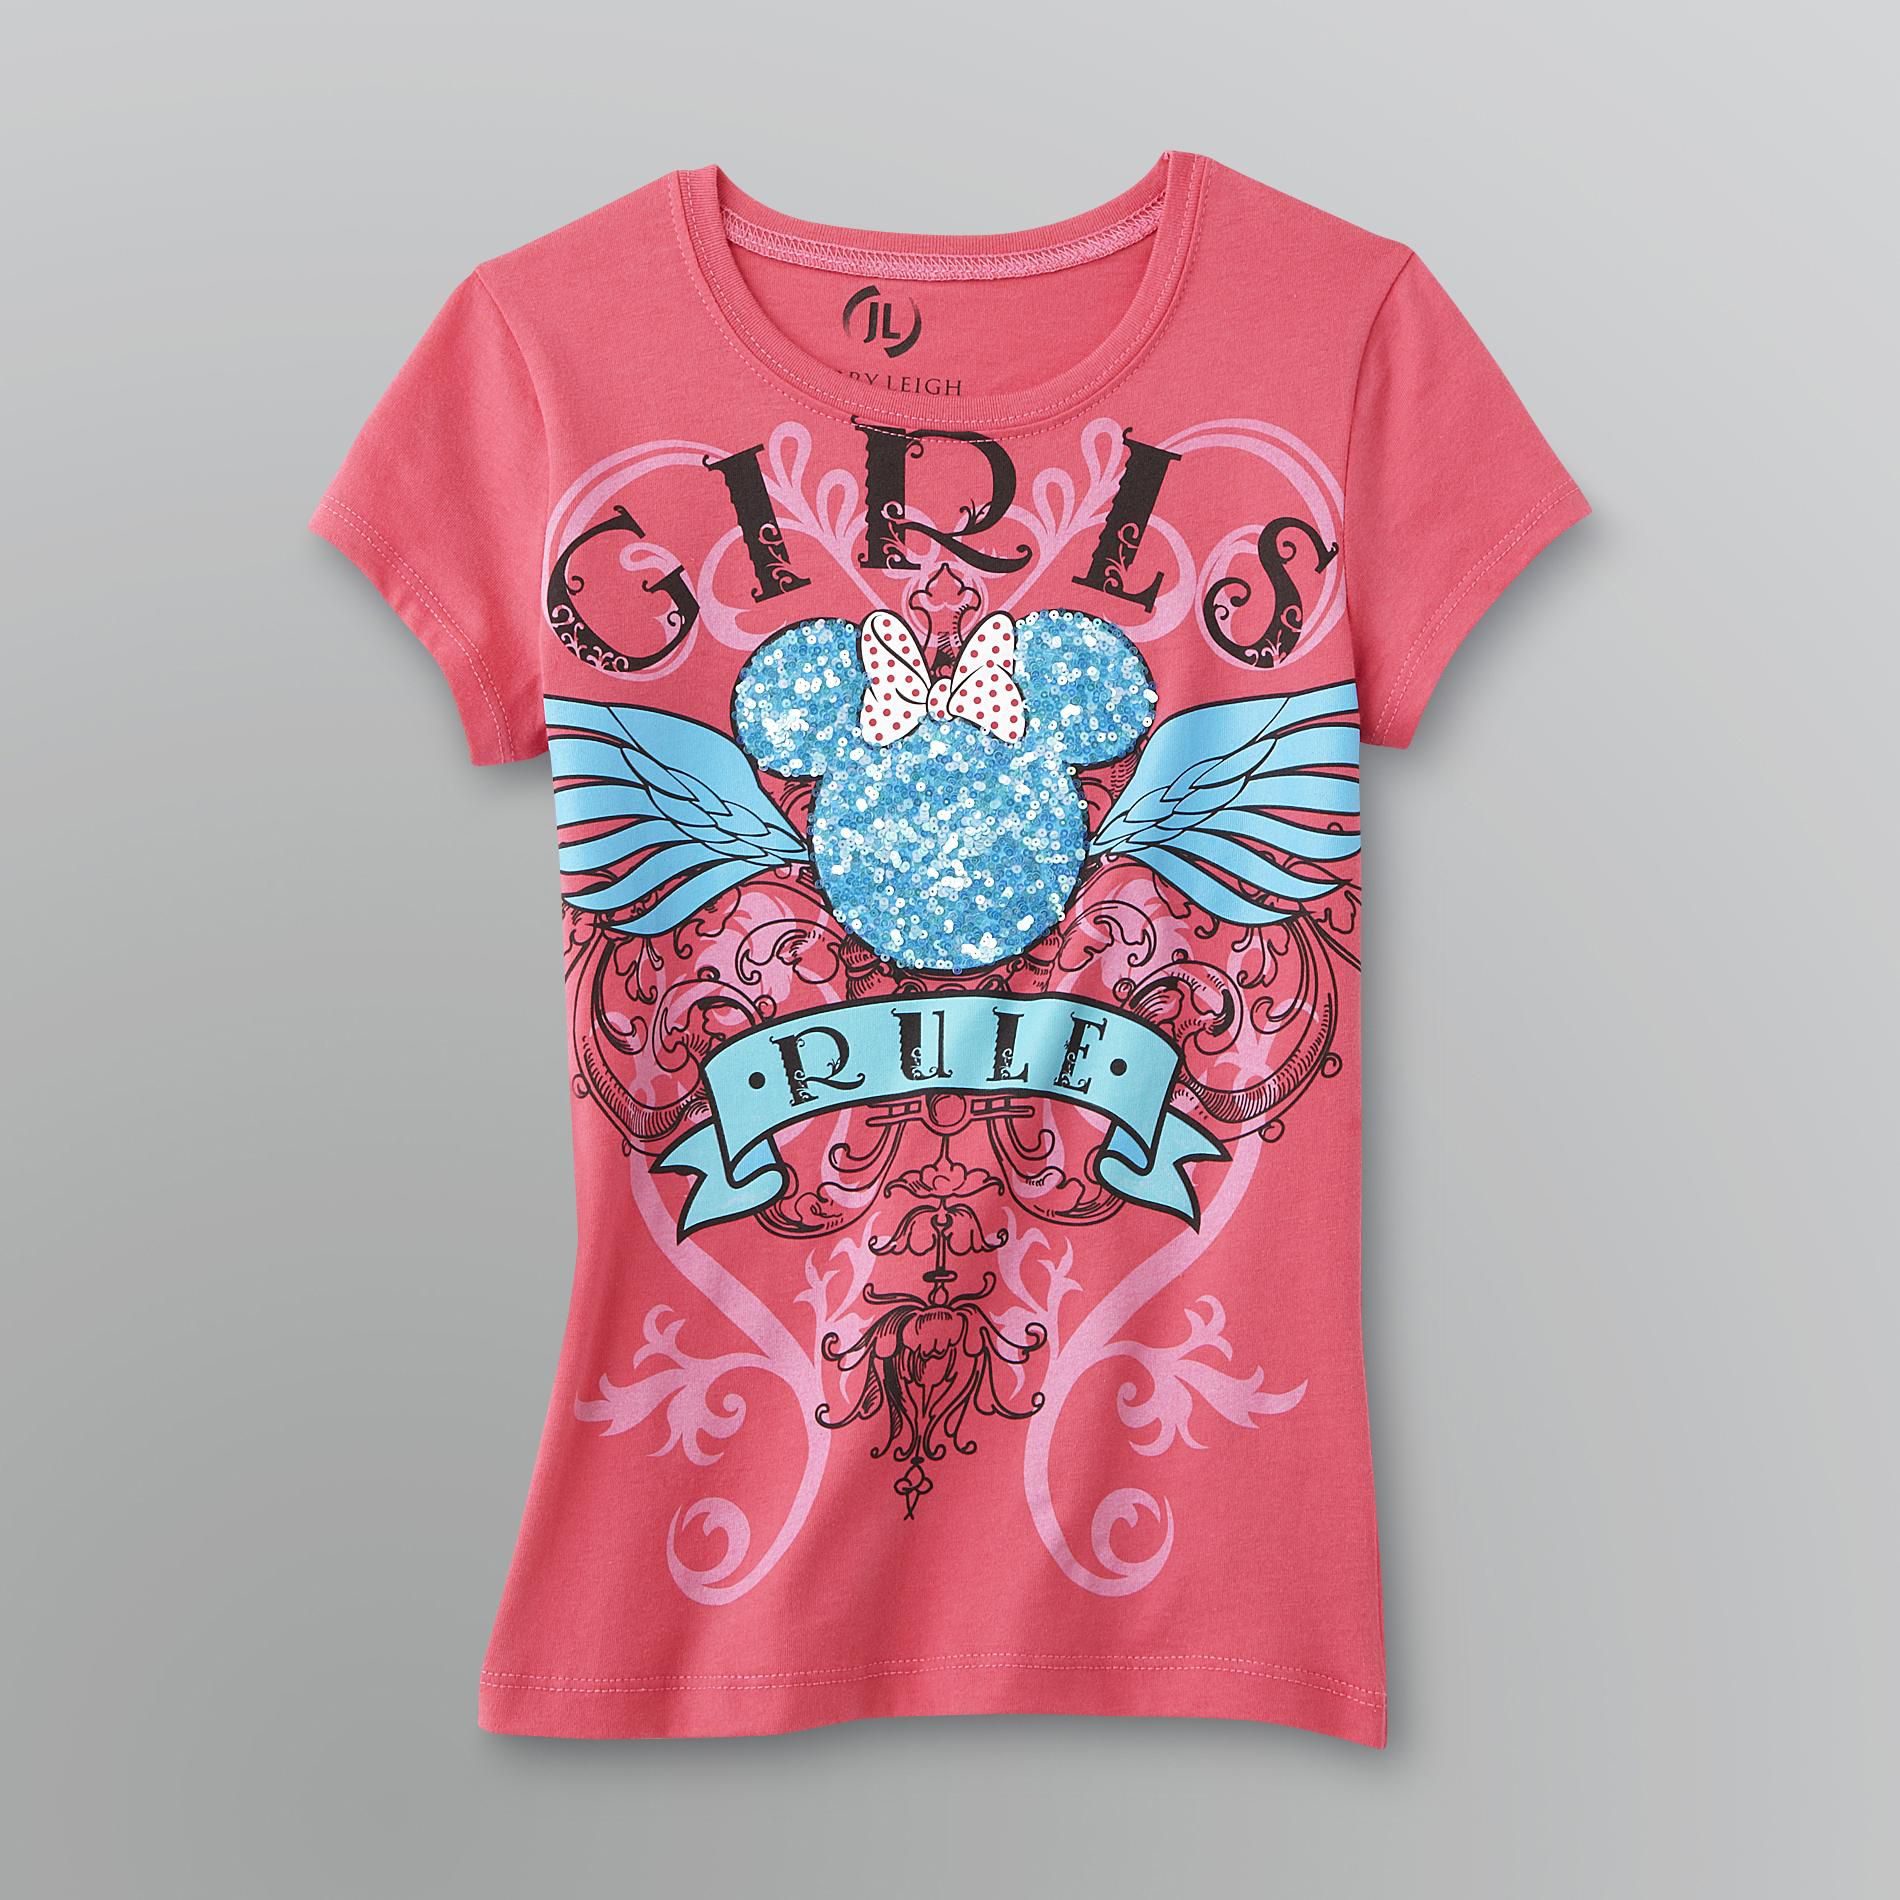 Disney Minnie Mouse Girl's Sequined T-Shirt - Girls Rule